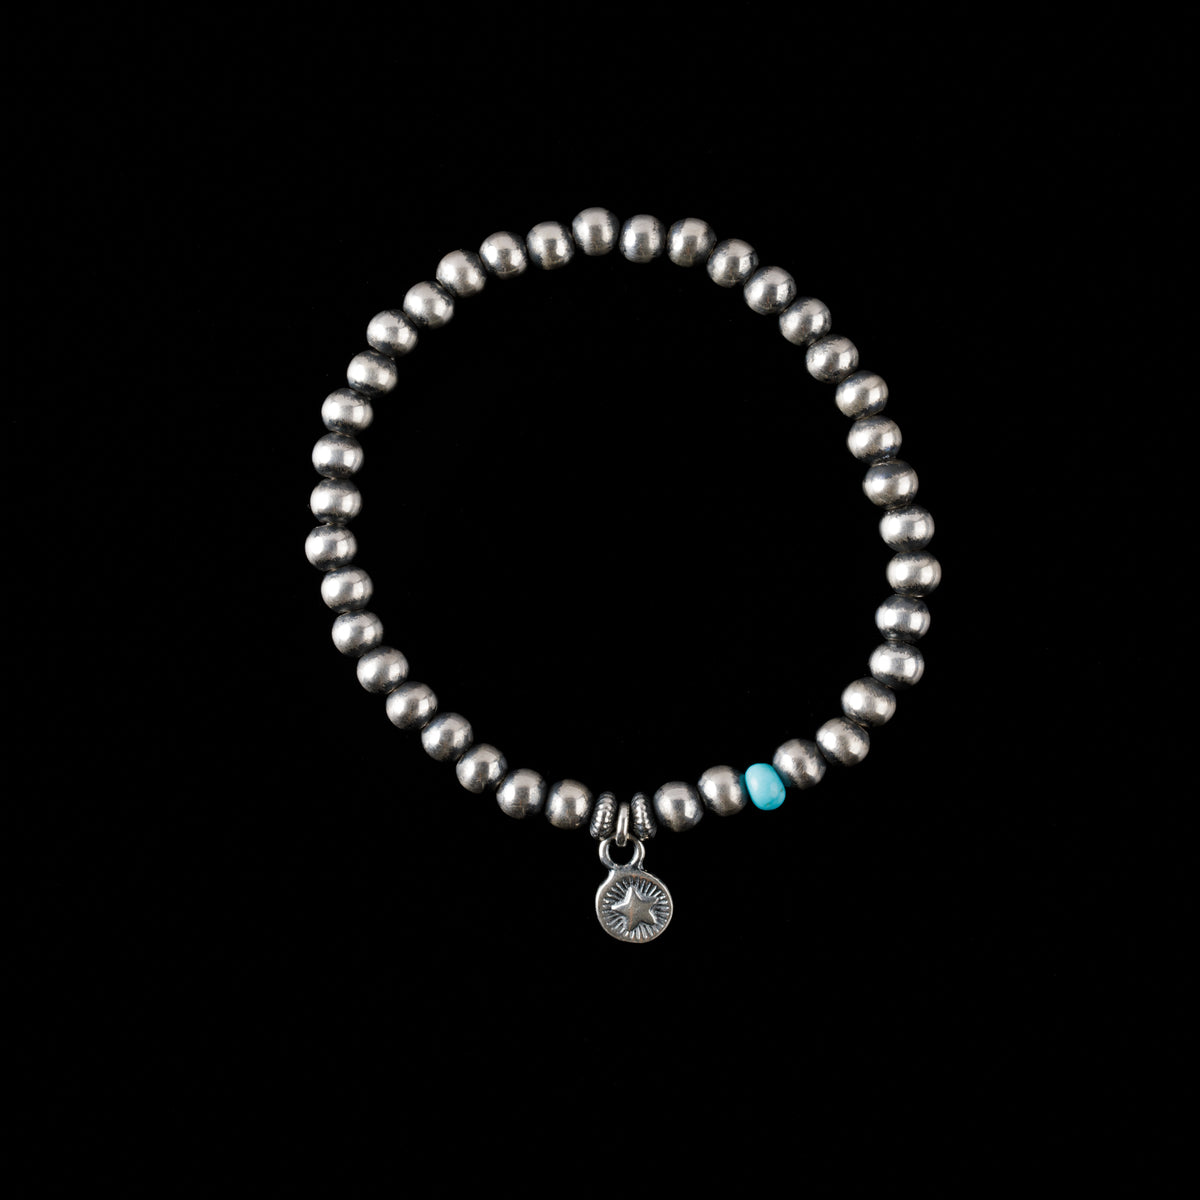 5 mm Sterling Silver Santa Fe Pearls with Turquoise Beads and Sterling Silver Star Charm